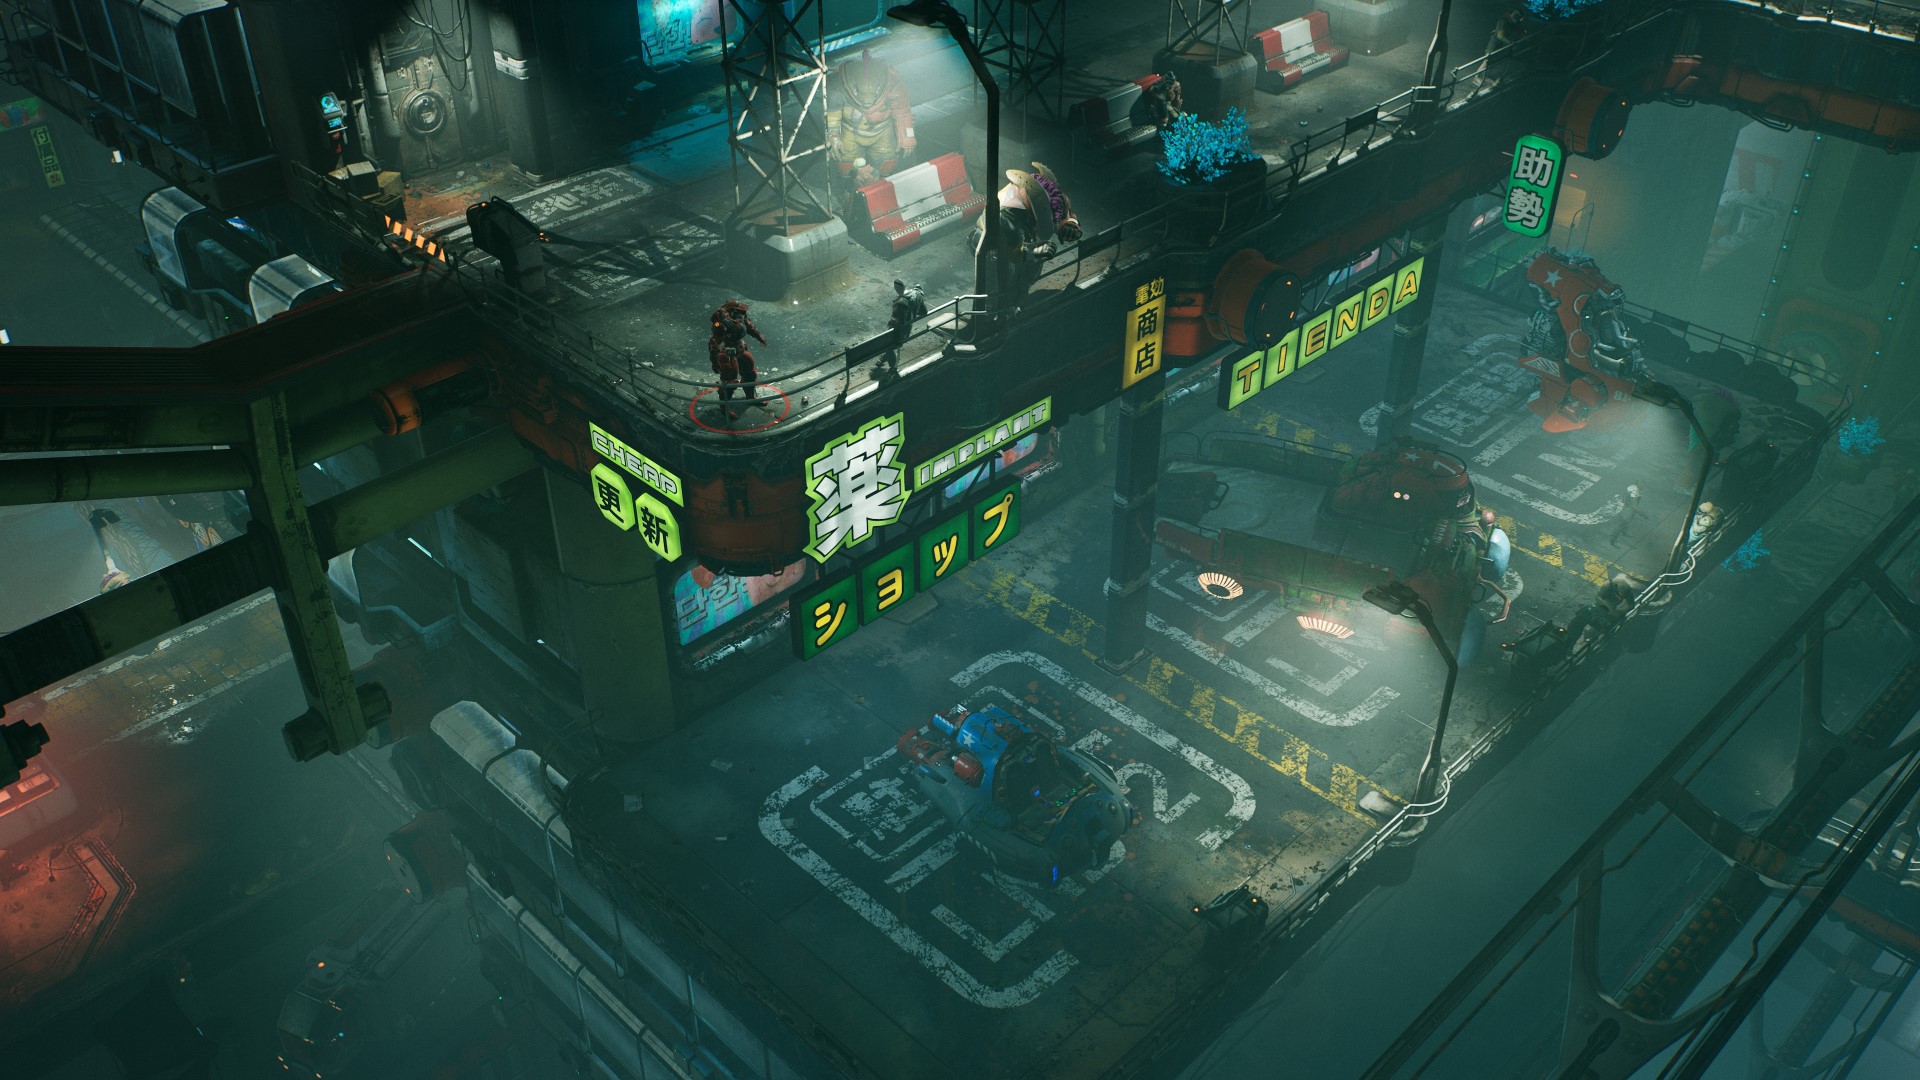 The player moving through a dingy neon city